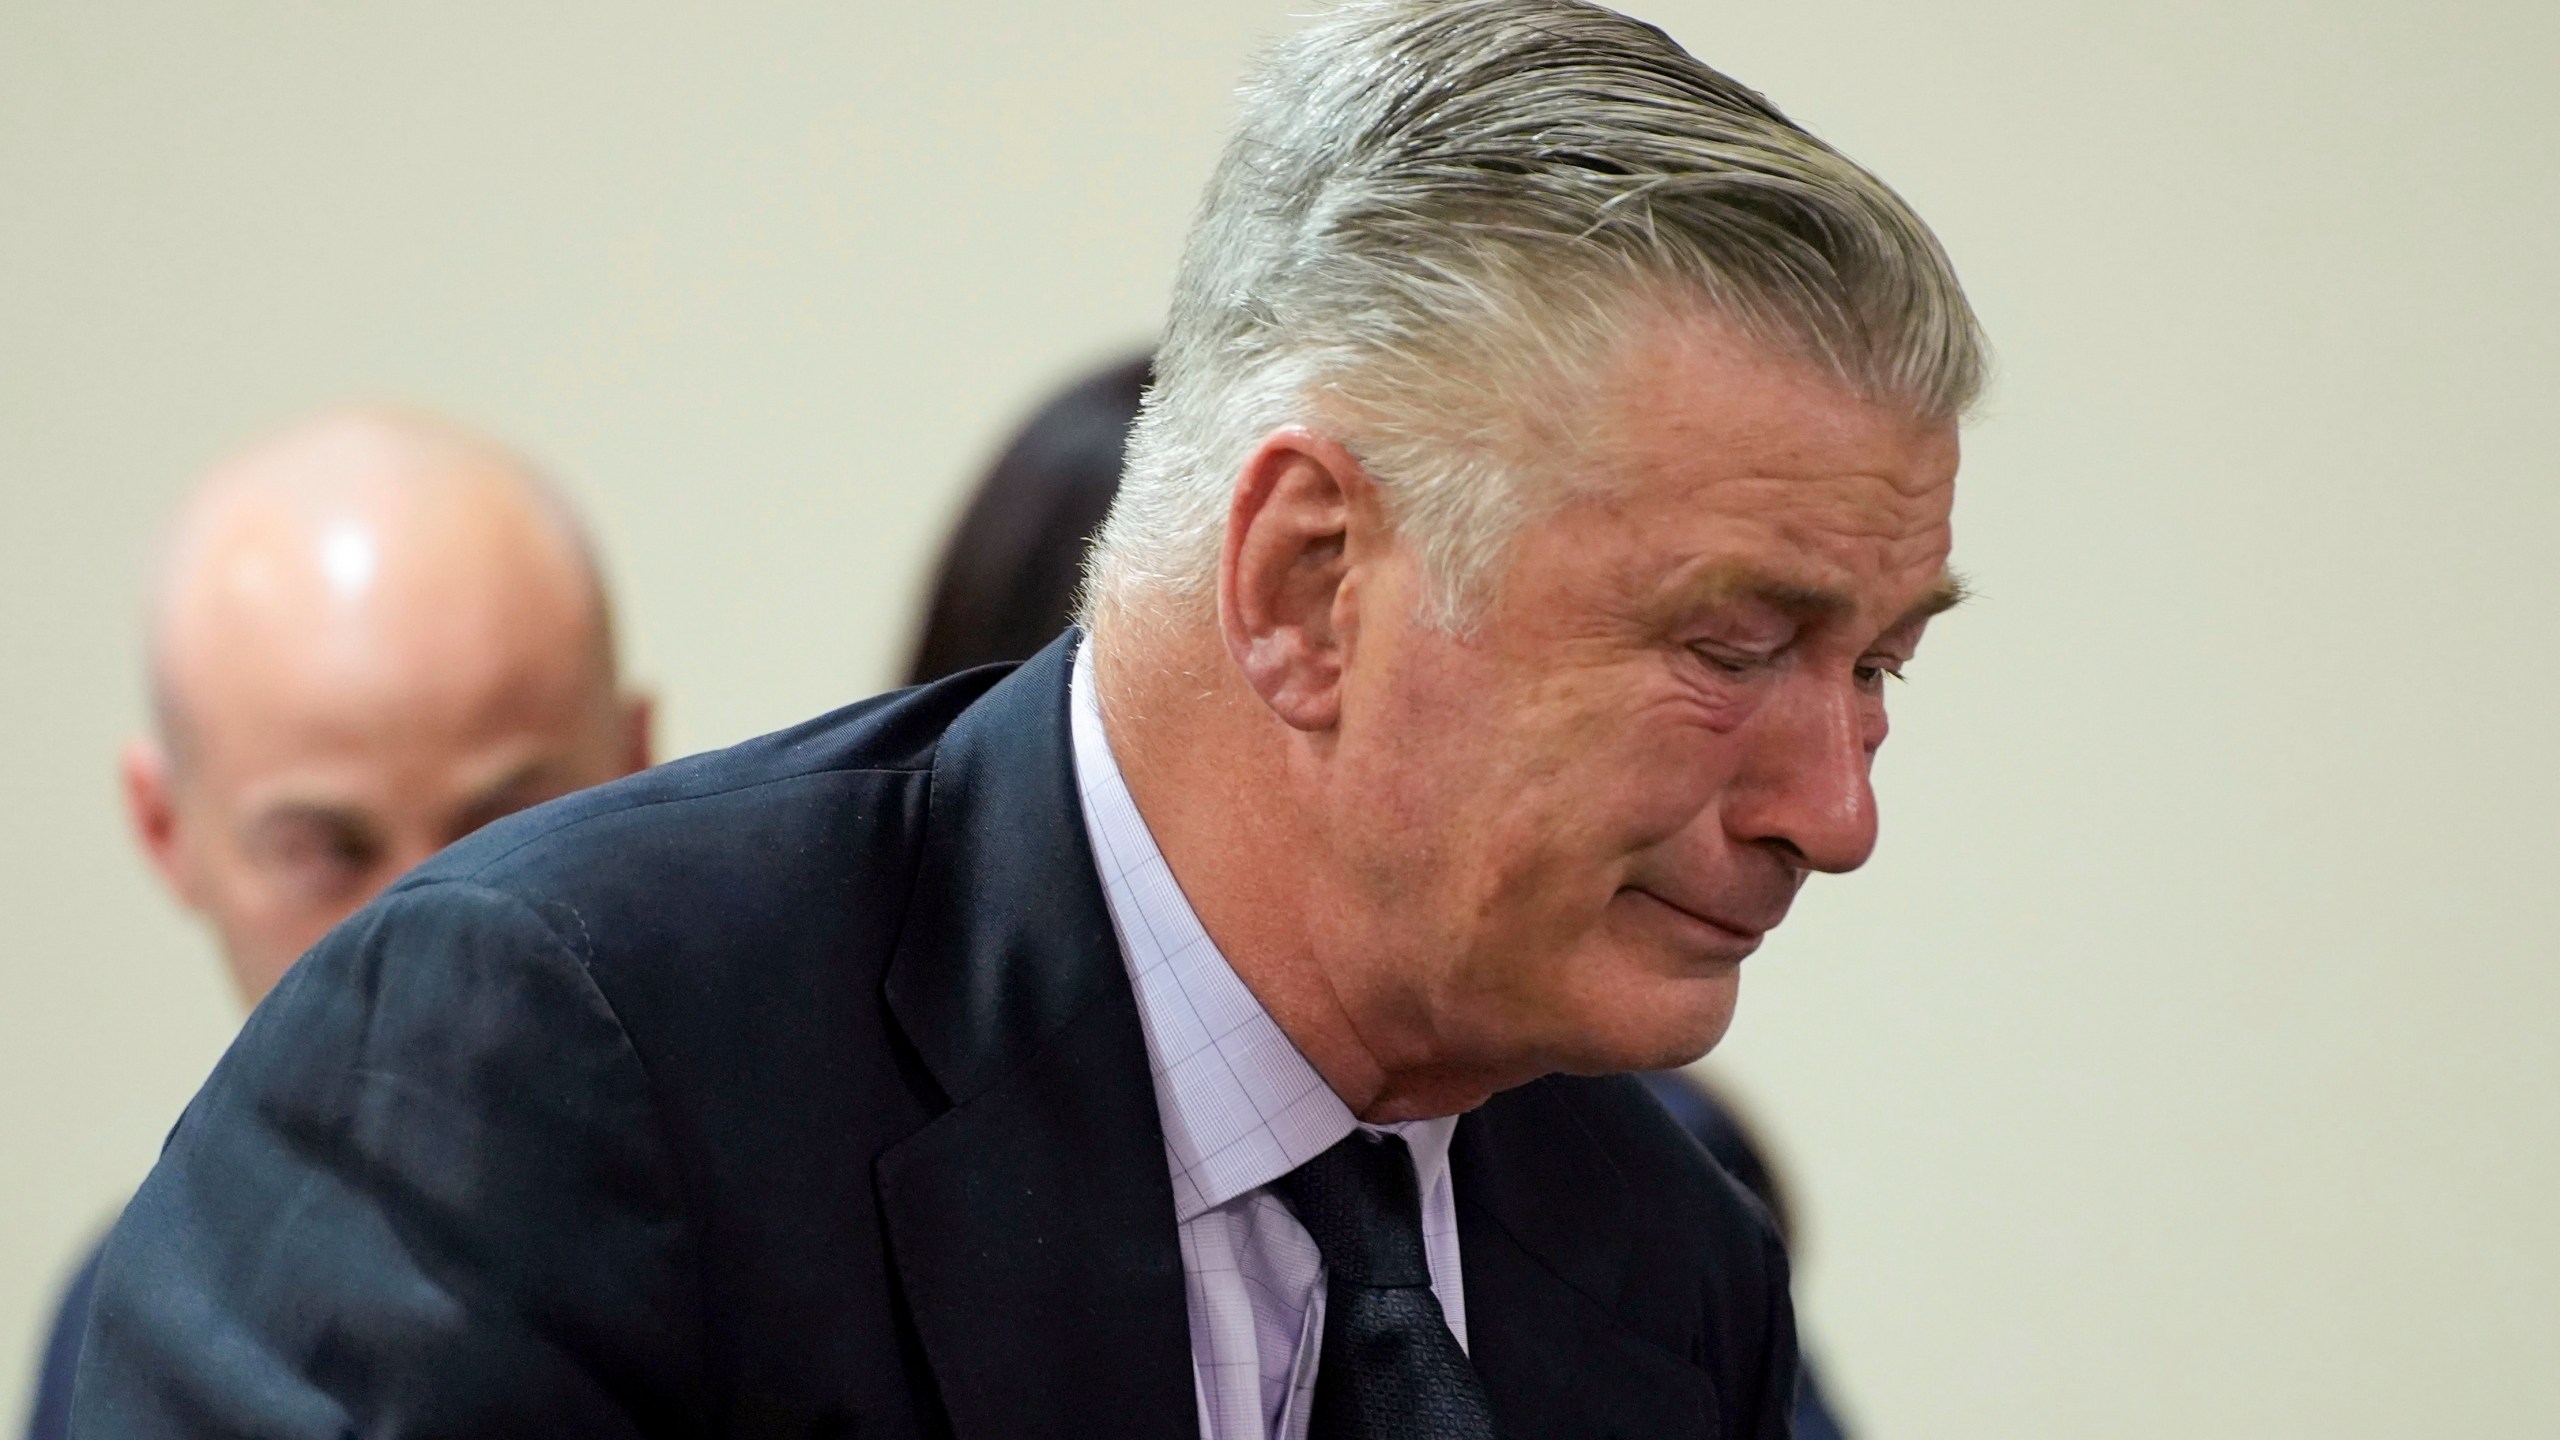 Actor Alec Baldwin reacts during his trial for involuntary manslaughter for the 2021 fatal shooting of cinematographer Halyna Hutchins during filming of the Western movie "Rust," Friday, July 12, 2024, at Santa Fe County District Court in Santa Fe, N.M. The judge threw out the case against Baldwin in the middle of his trial and said it cannot be filed again. (Ramsay de Give/Pool Photo via AP)